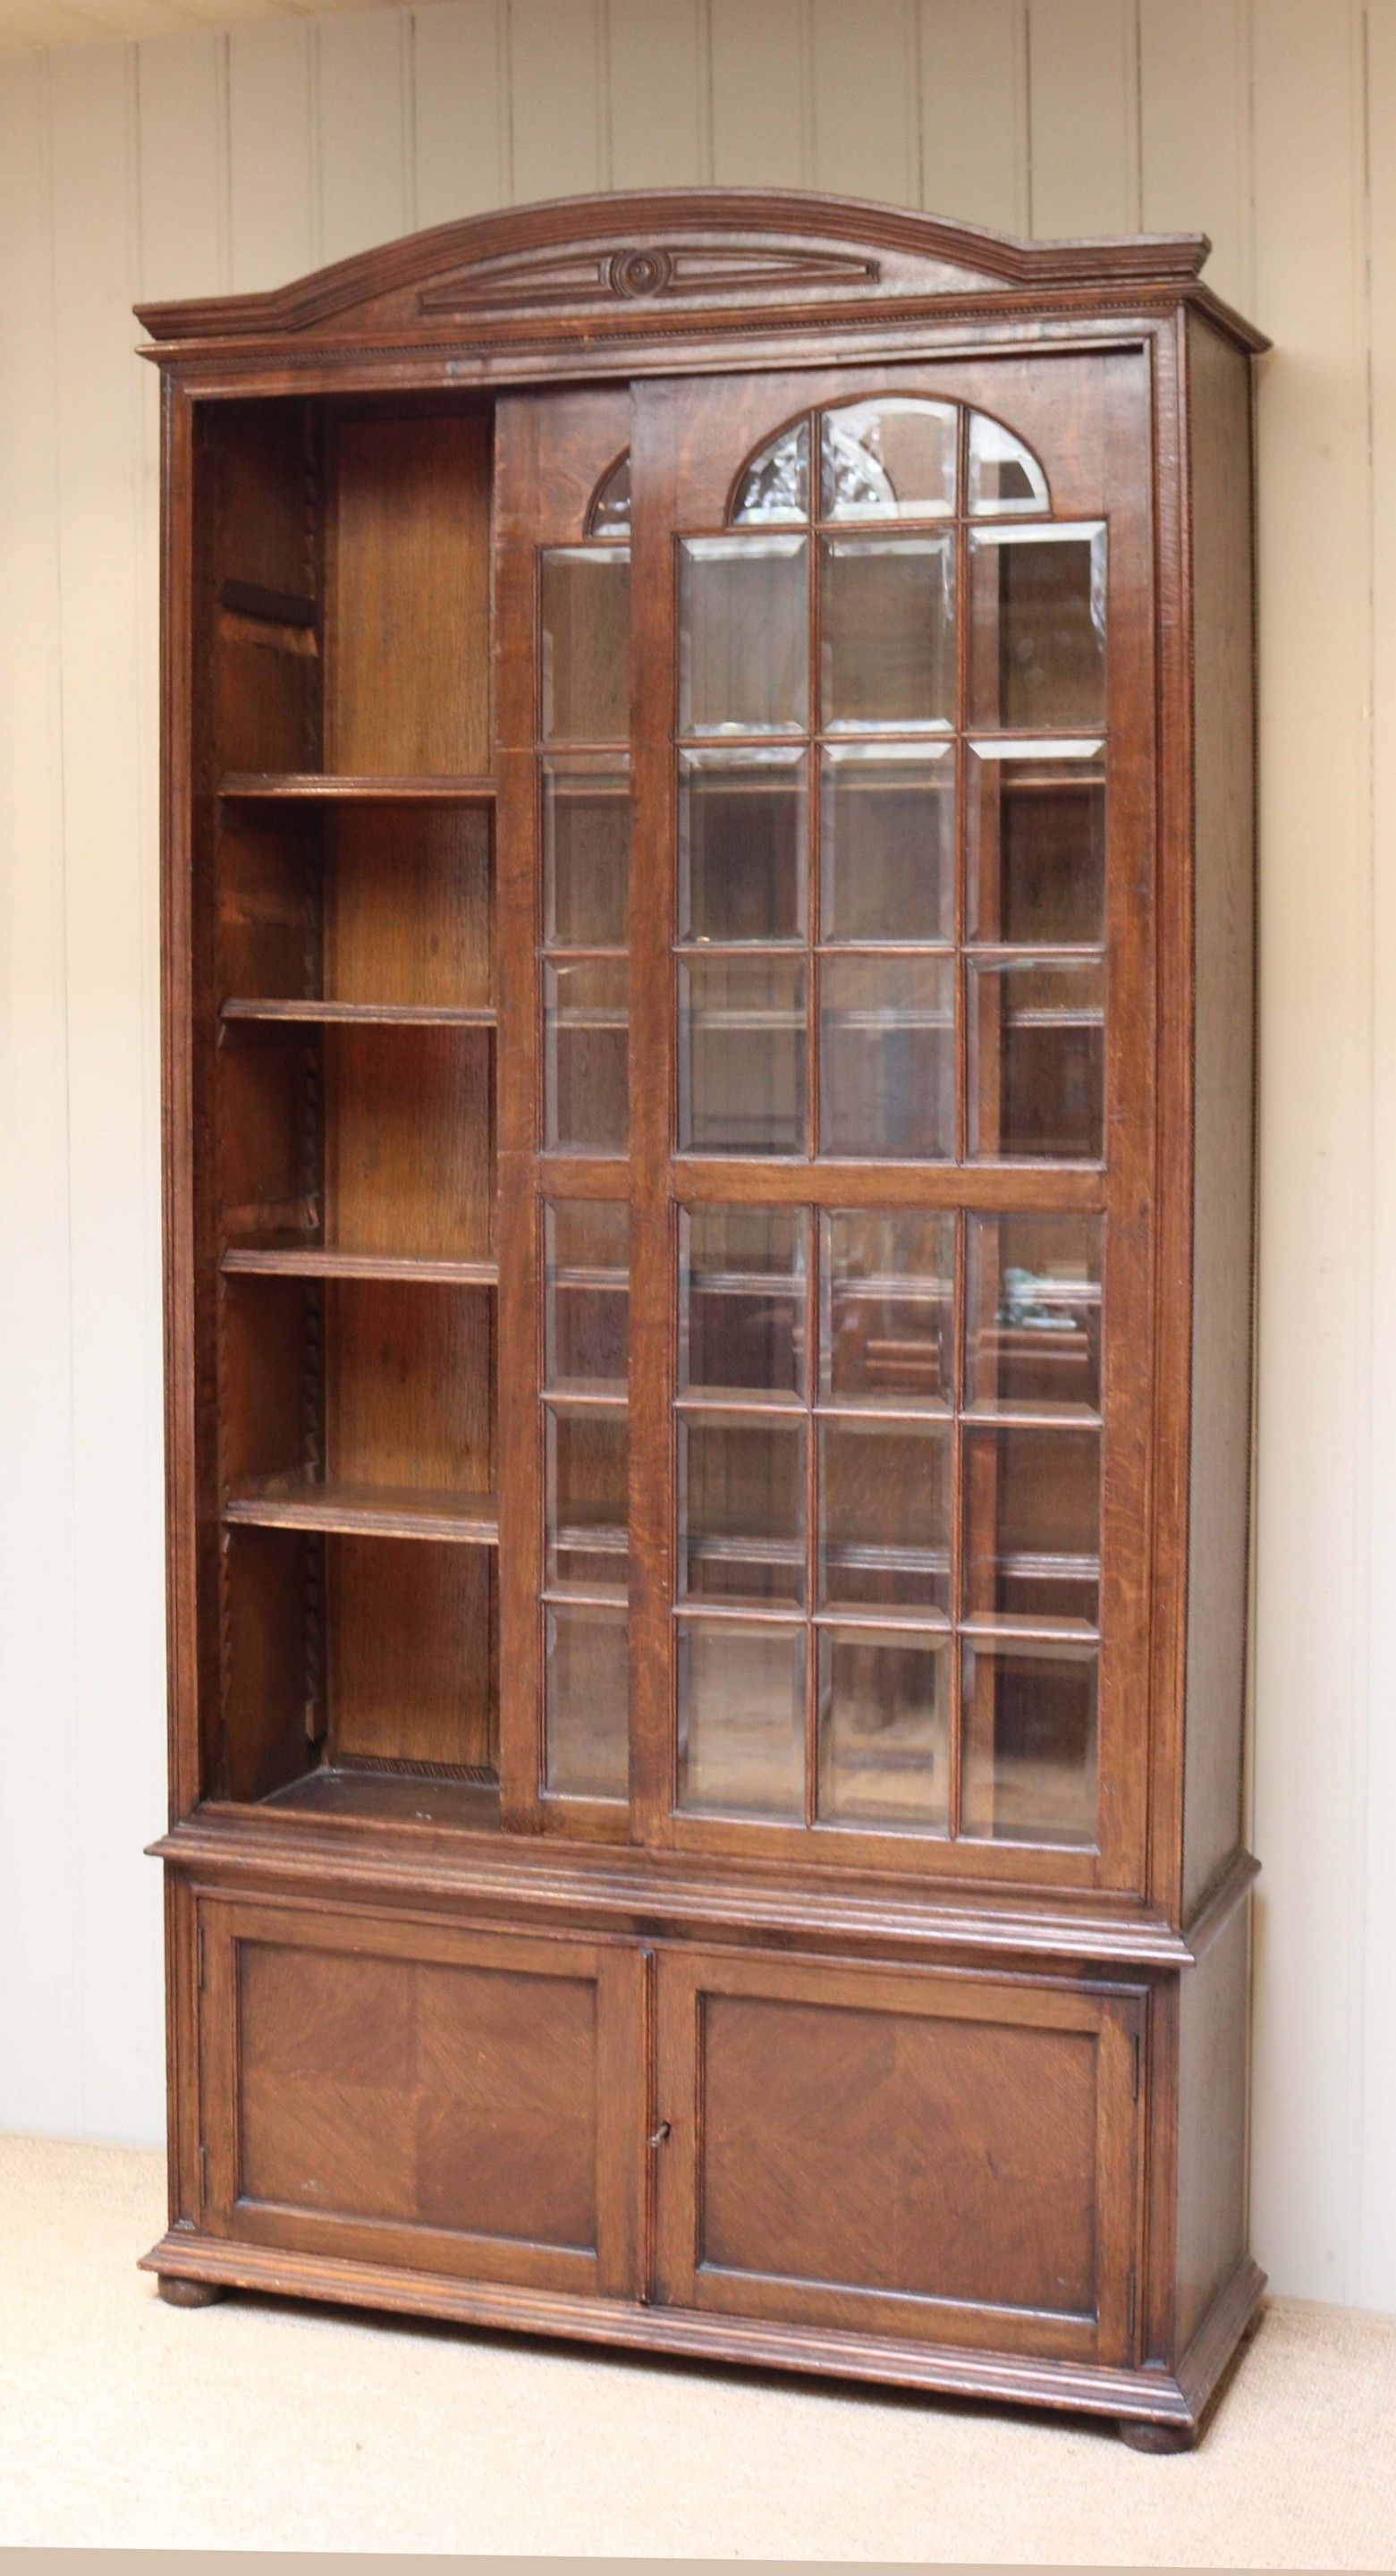 Solid Oak Glazed Bookcase C 1910 England From Worboys Antiques Regarding Oak Glazed Bookcase (View 12 of 15)